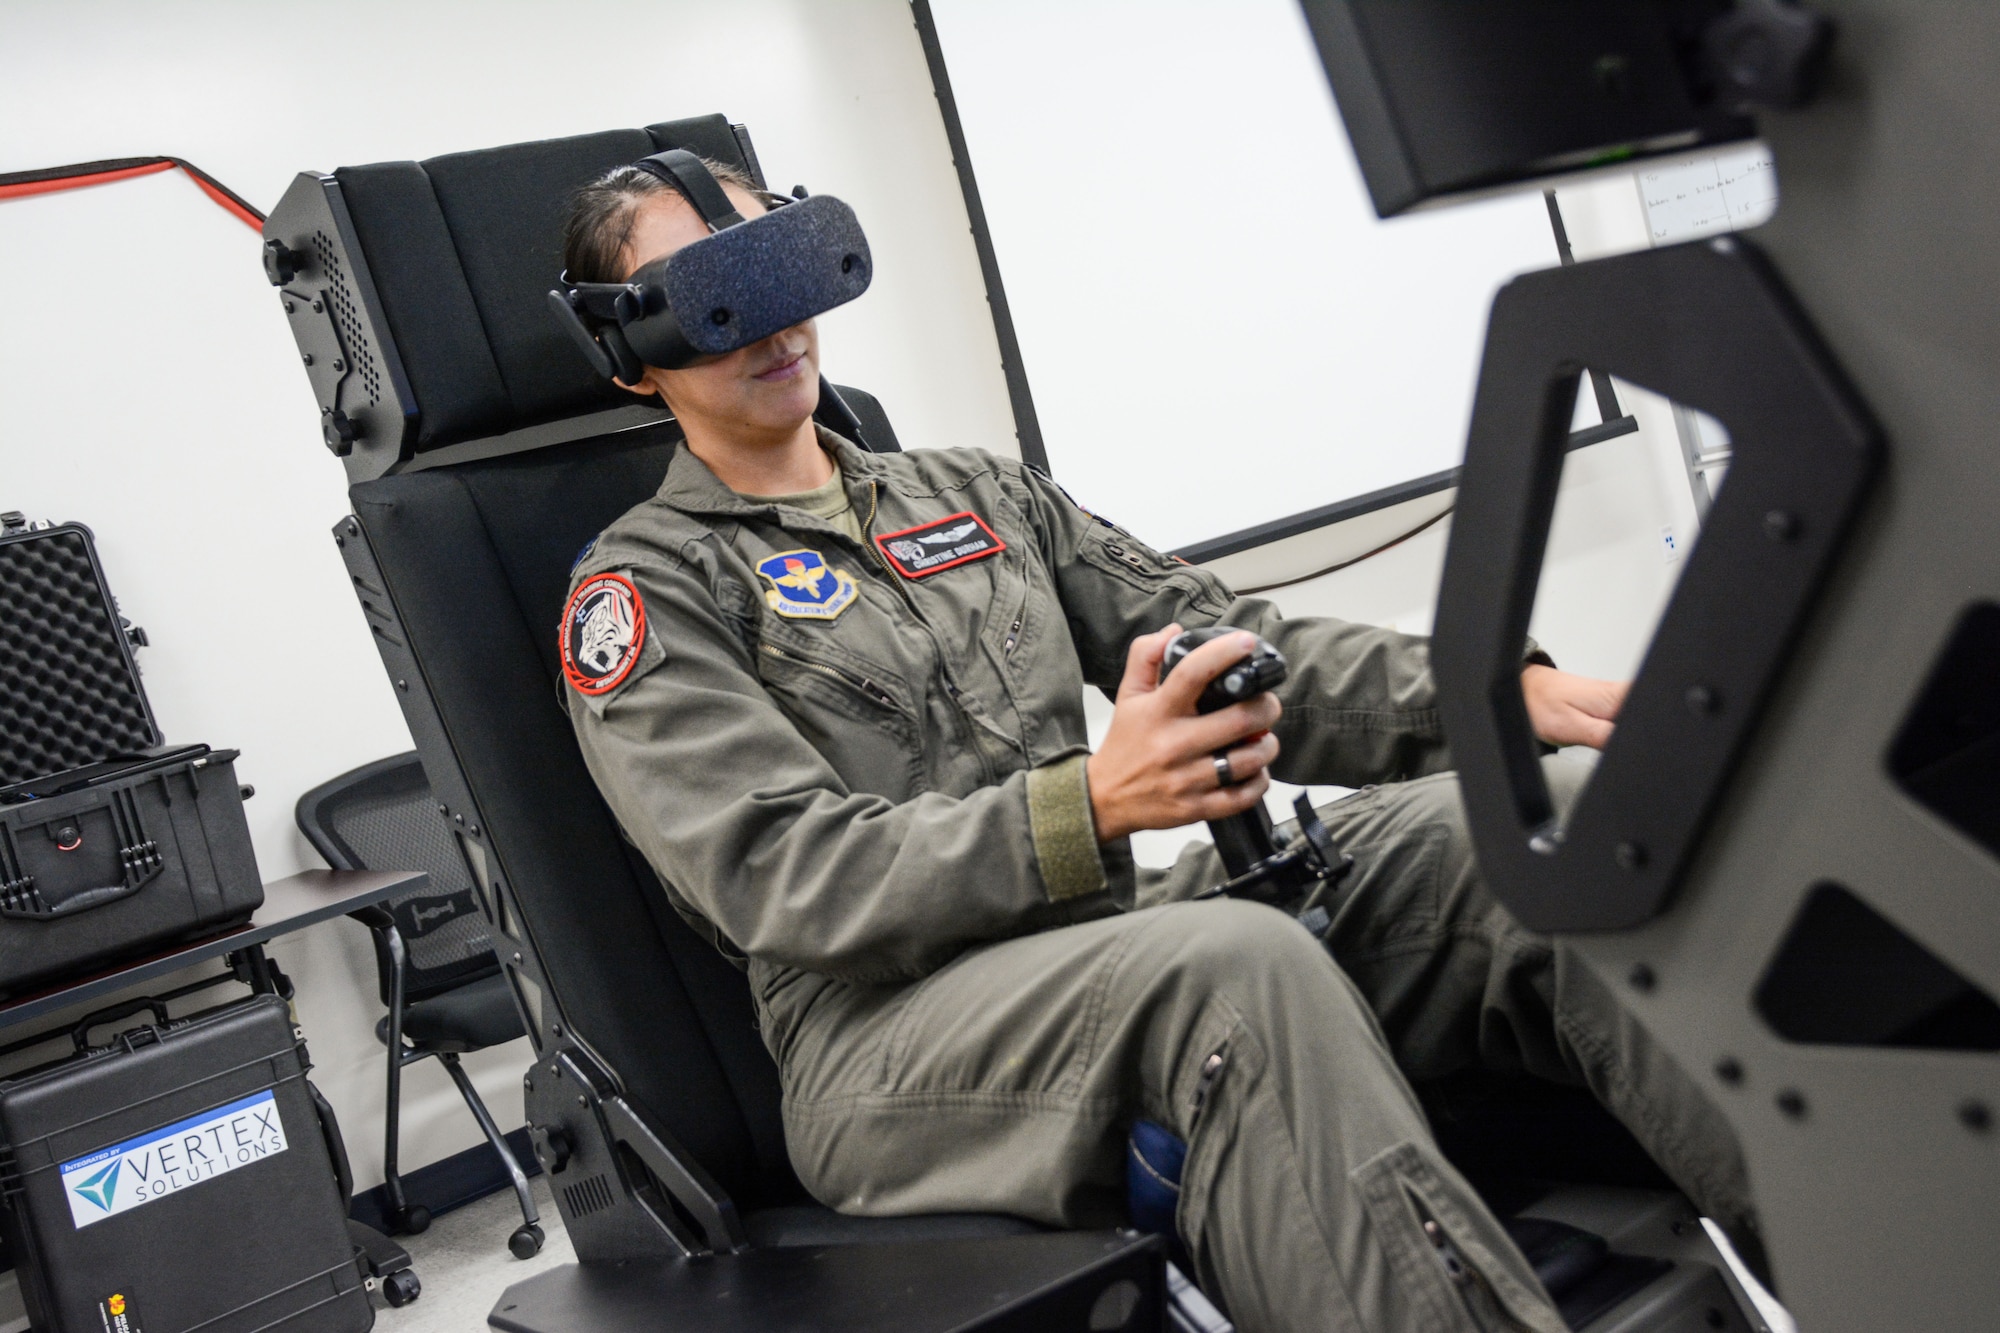 A woman in a military flight suit operates an aircraft simulator.